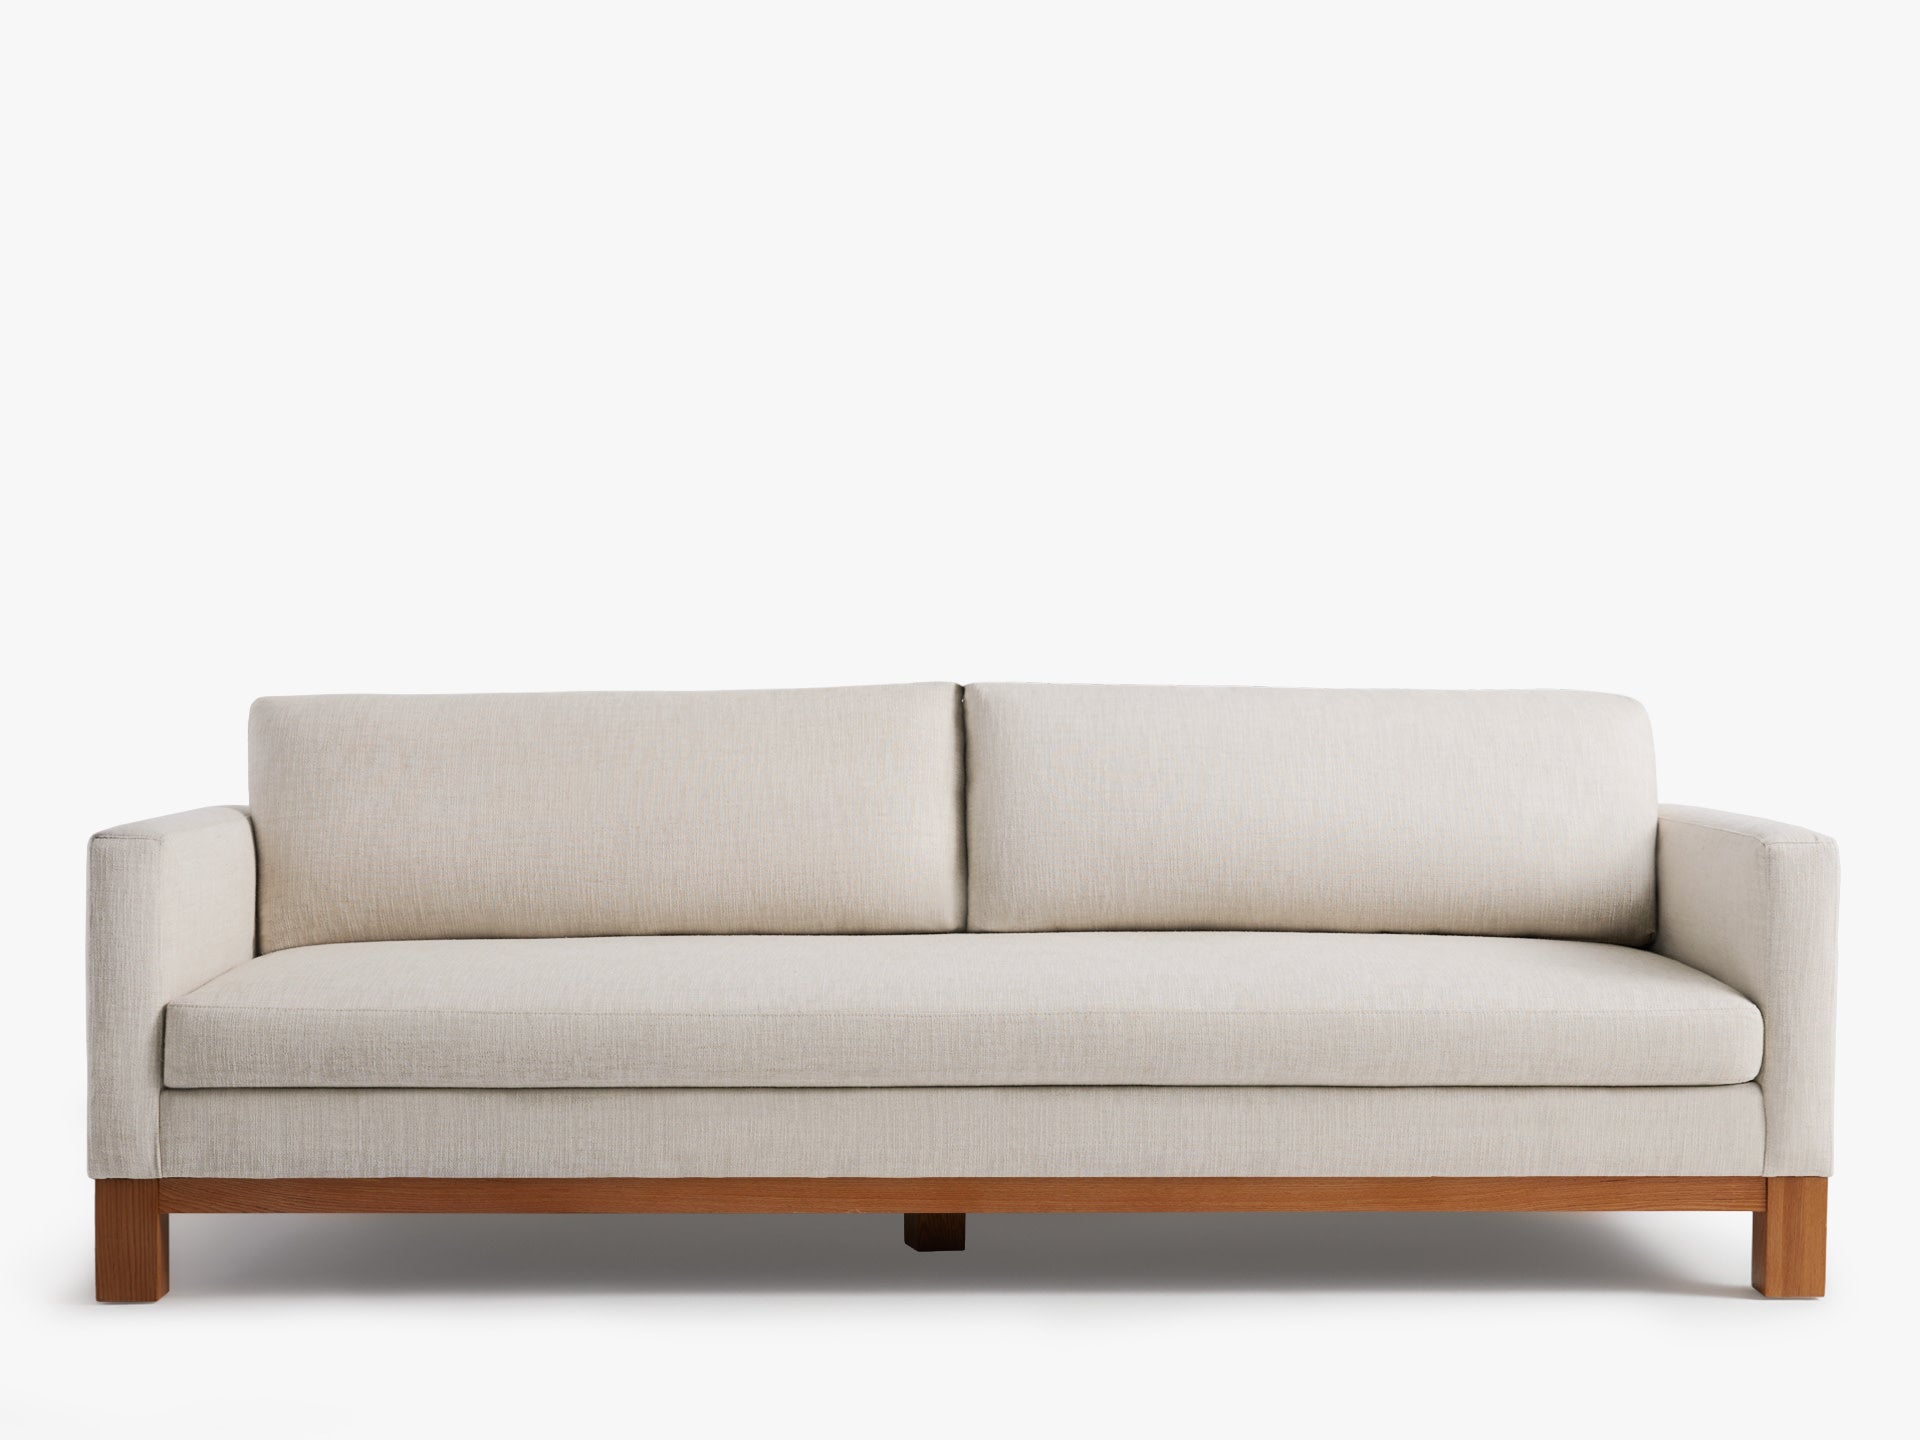 We Found the Perfect Sofa—Made in the U.S., Solid Wood Frame—And It’s From Parachute